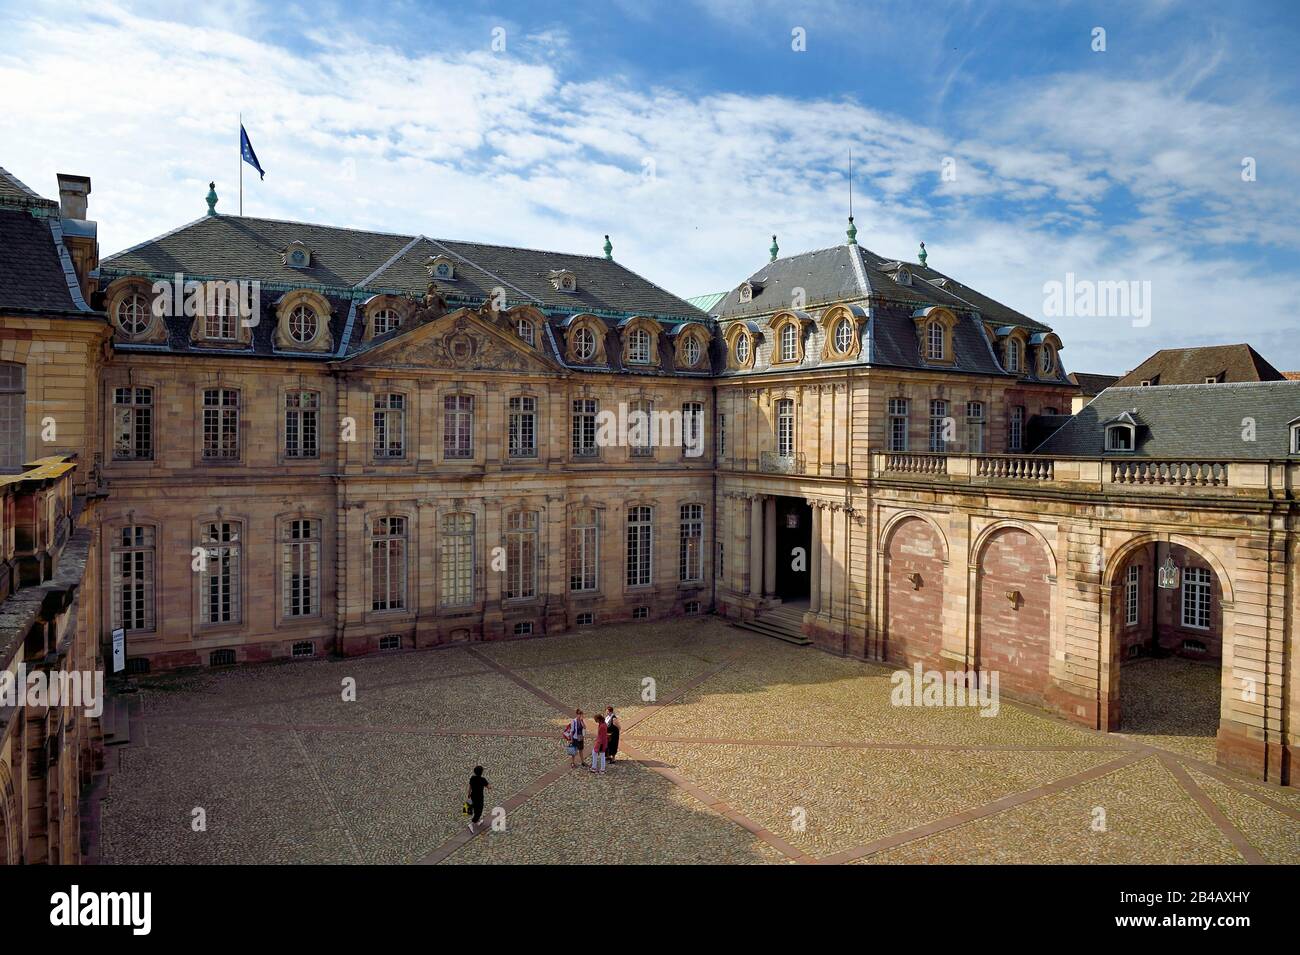 France, Bas Rhin, Strasbourg, old town listed as World Heritage by UNESCO, the Palais Rohan (Rohan Palace), it houses the Museum of Decorative Arts, the Museum of Fine Arts and the Archaeological Museum Stock Photo